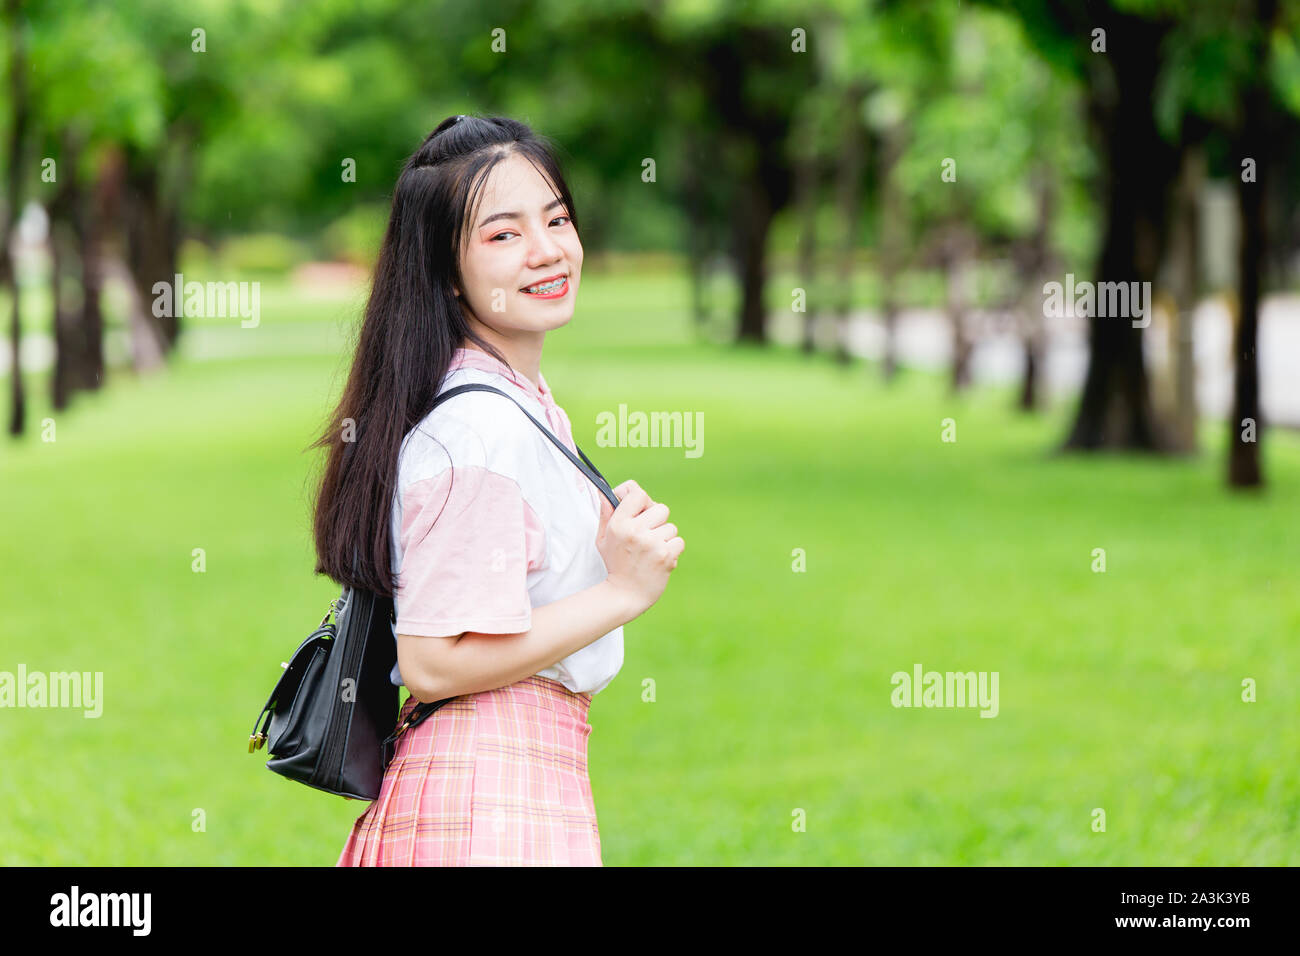 Asian teen girl smiling with braces dents happy travel outdoor à Green Park background Banque D'Images